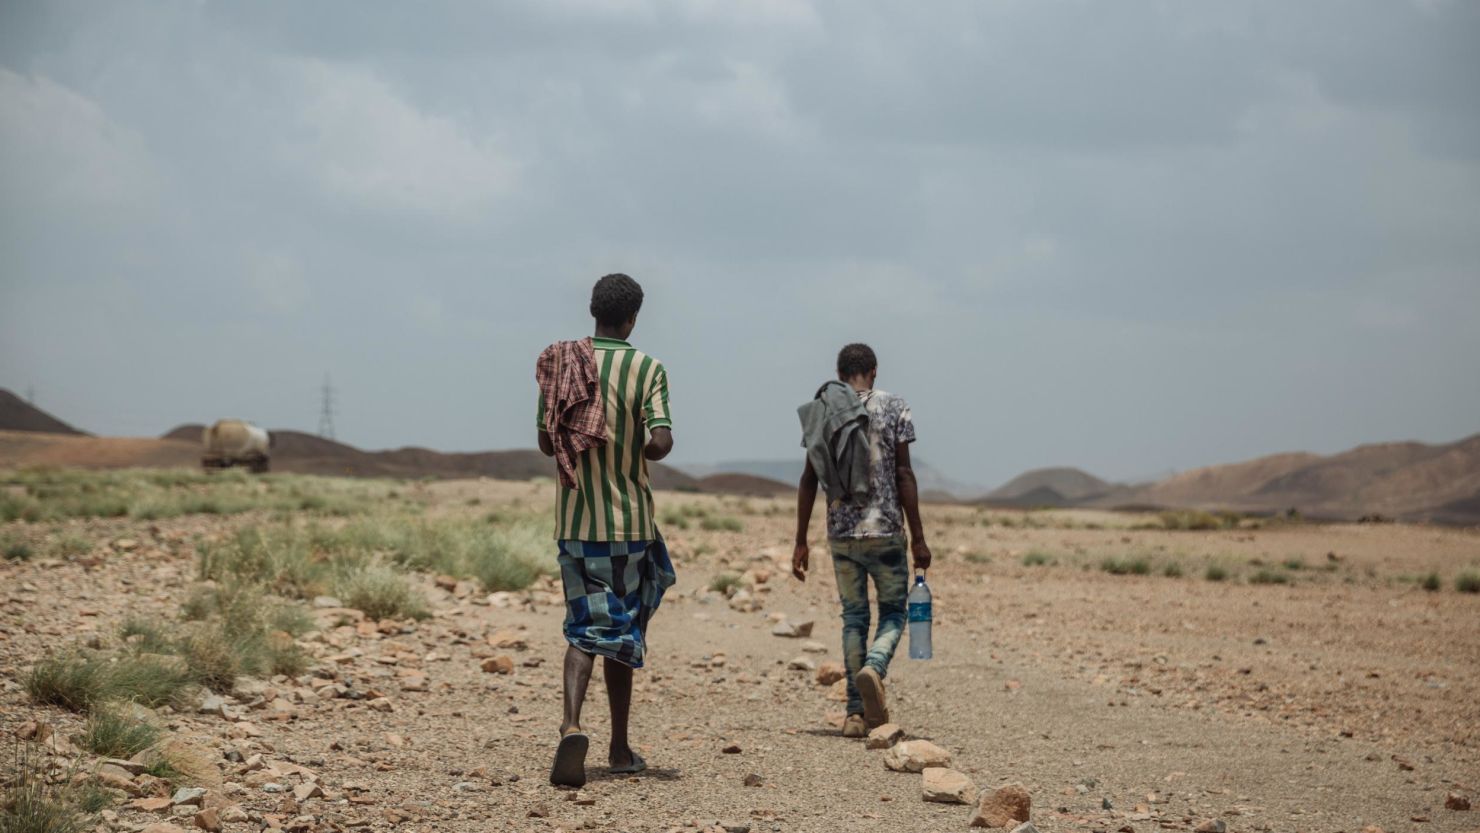 Jamal and Ahmed are two Ethiopian migrants traveling across the border into Djibouti, bound for Yemen.